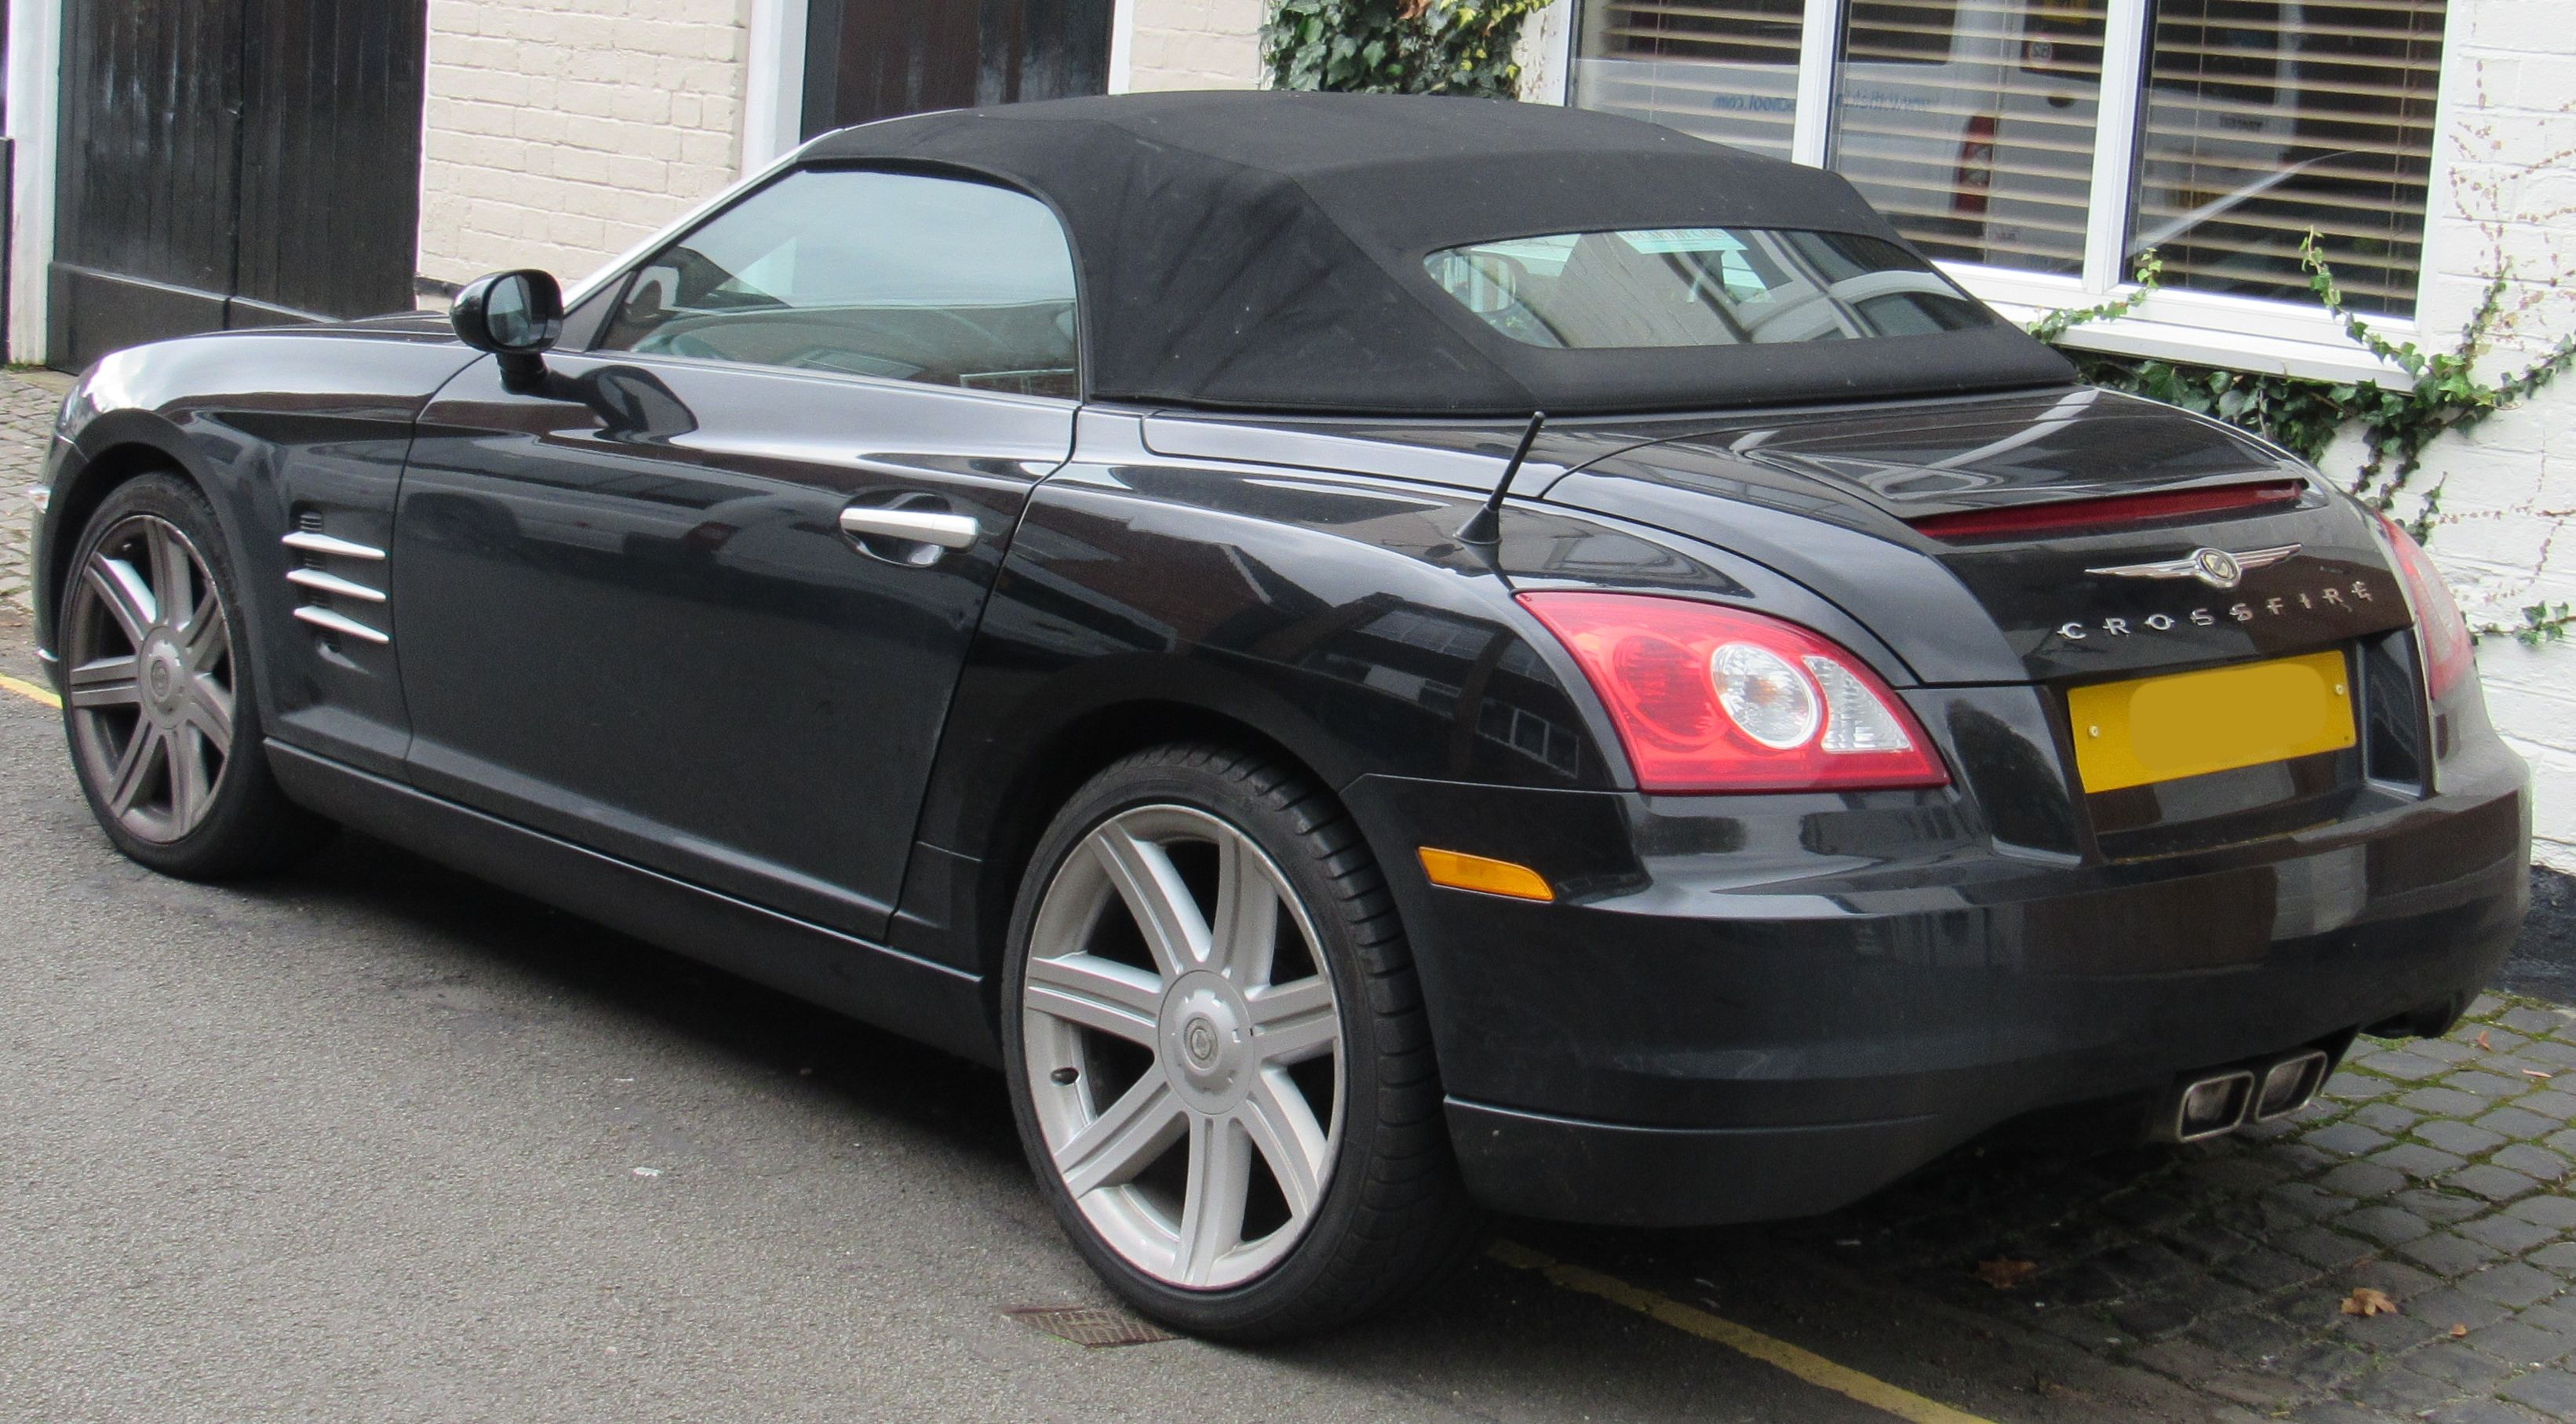 The 2004 Chrysler Crossfire rear view.